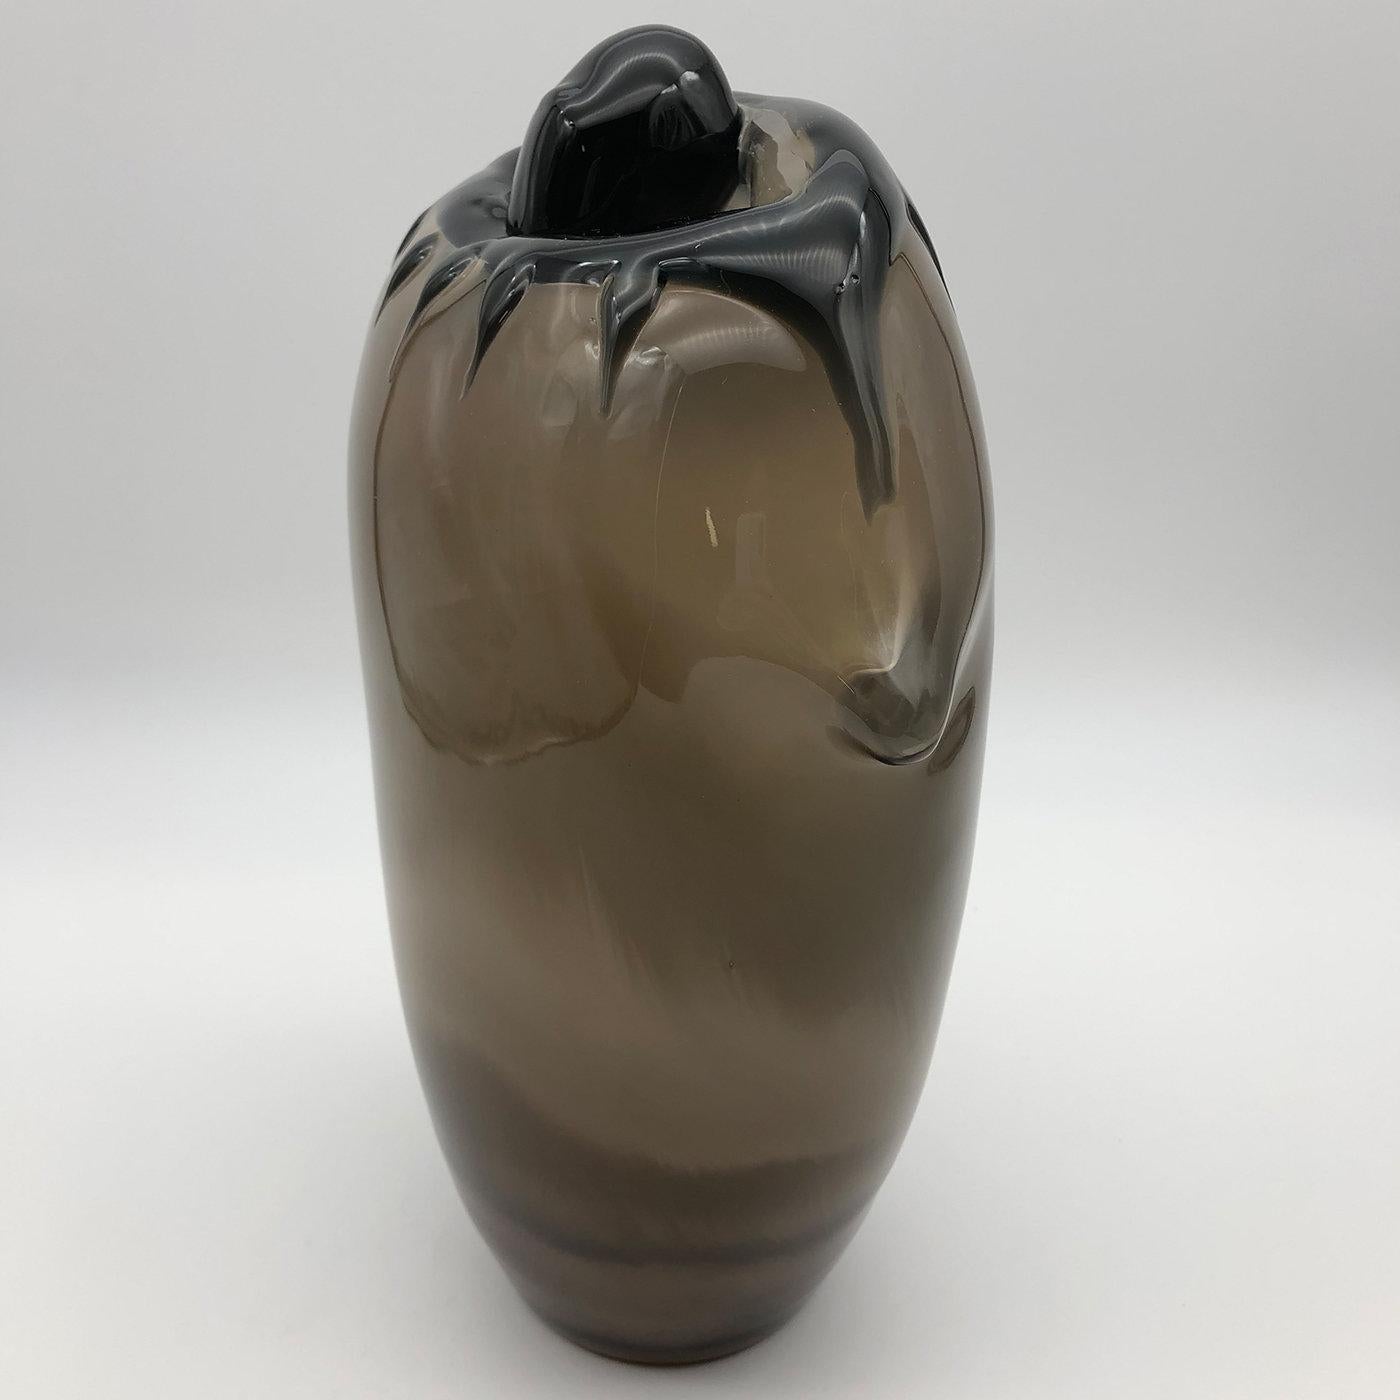 A superb design that combines art and functionality, this magnificent vase is meticulously handcrafted of glass by Ars Murano's expert glassblower Toso Cristiano. Showcasing a combination of white and dark amber hues seemingly melting and dripping